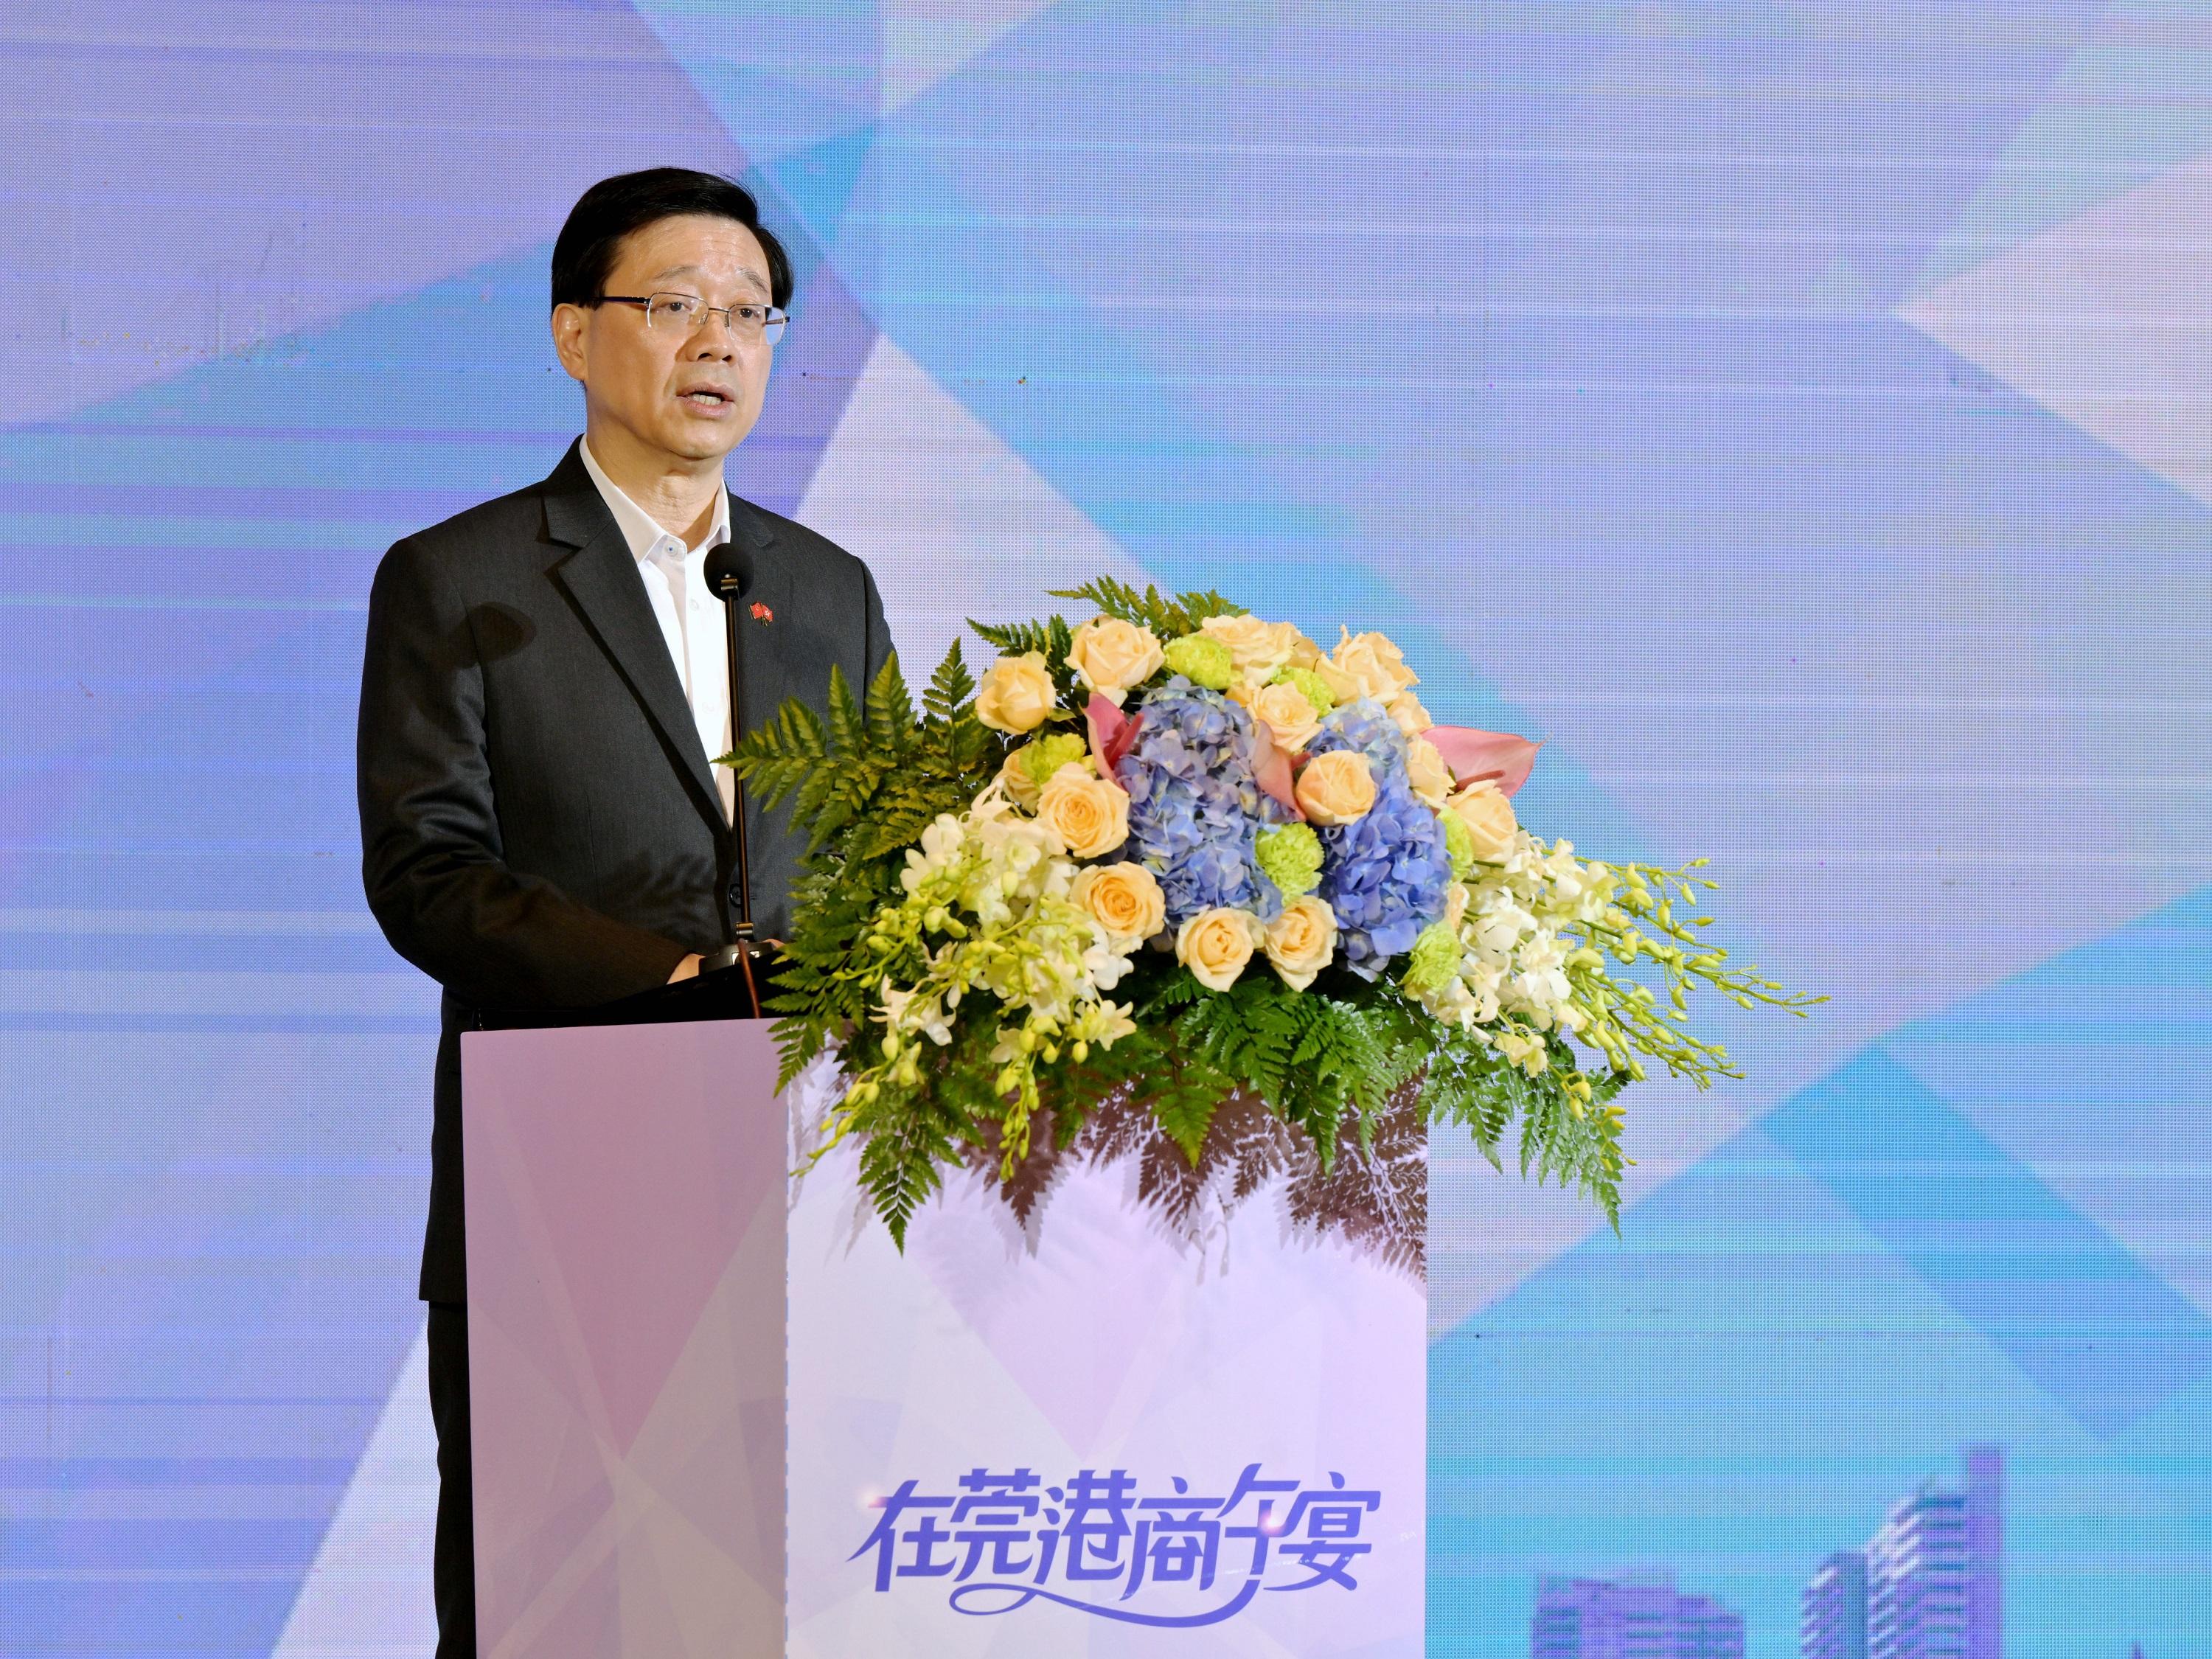 The Chief Executive, Mr John Lee, led a delegation of the Hong Kong Special Administrative Region Government and the Legislative Council to visit Guangdong-Hong Kong-Macao Greater Bay Area in Dongguan today (April 23). Photo shows Mr Lee speaking at the luncheon hosted by the Dongguan Waishang Investment Enterprise Association.